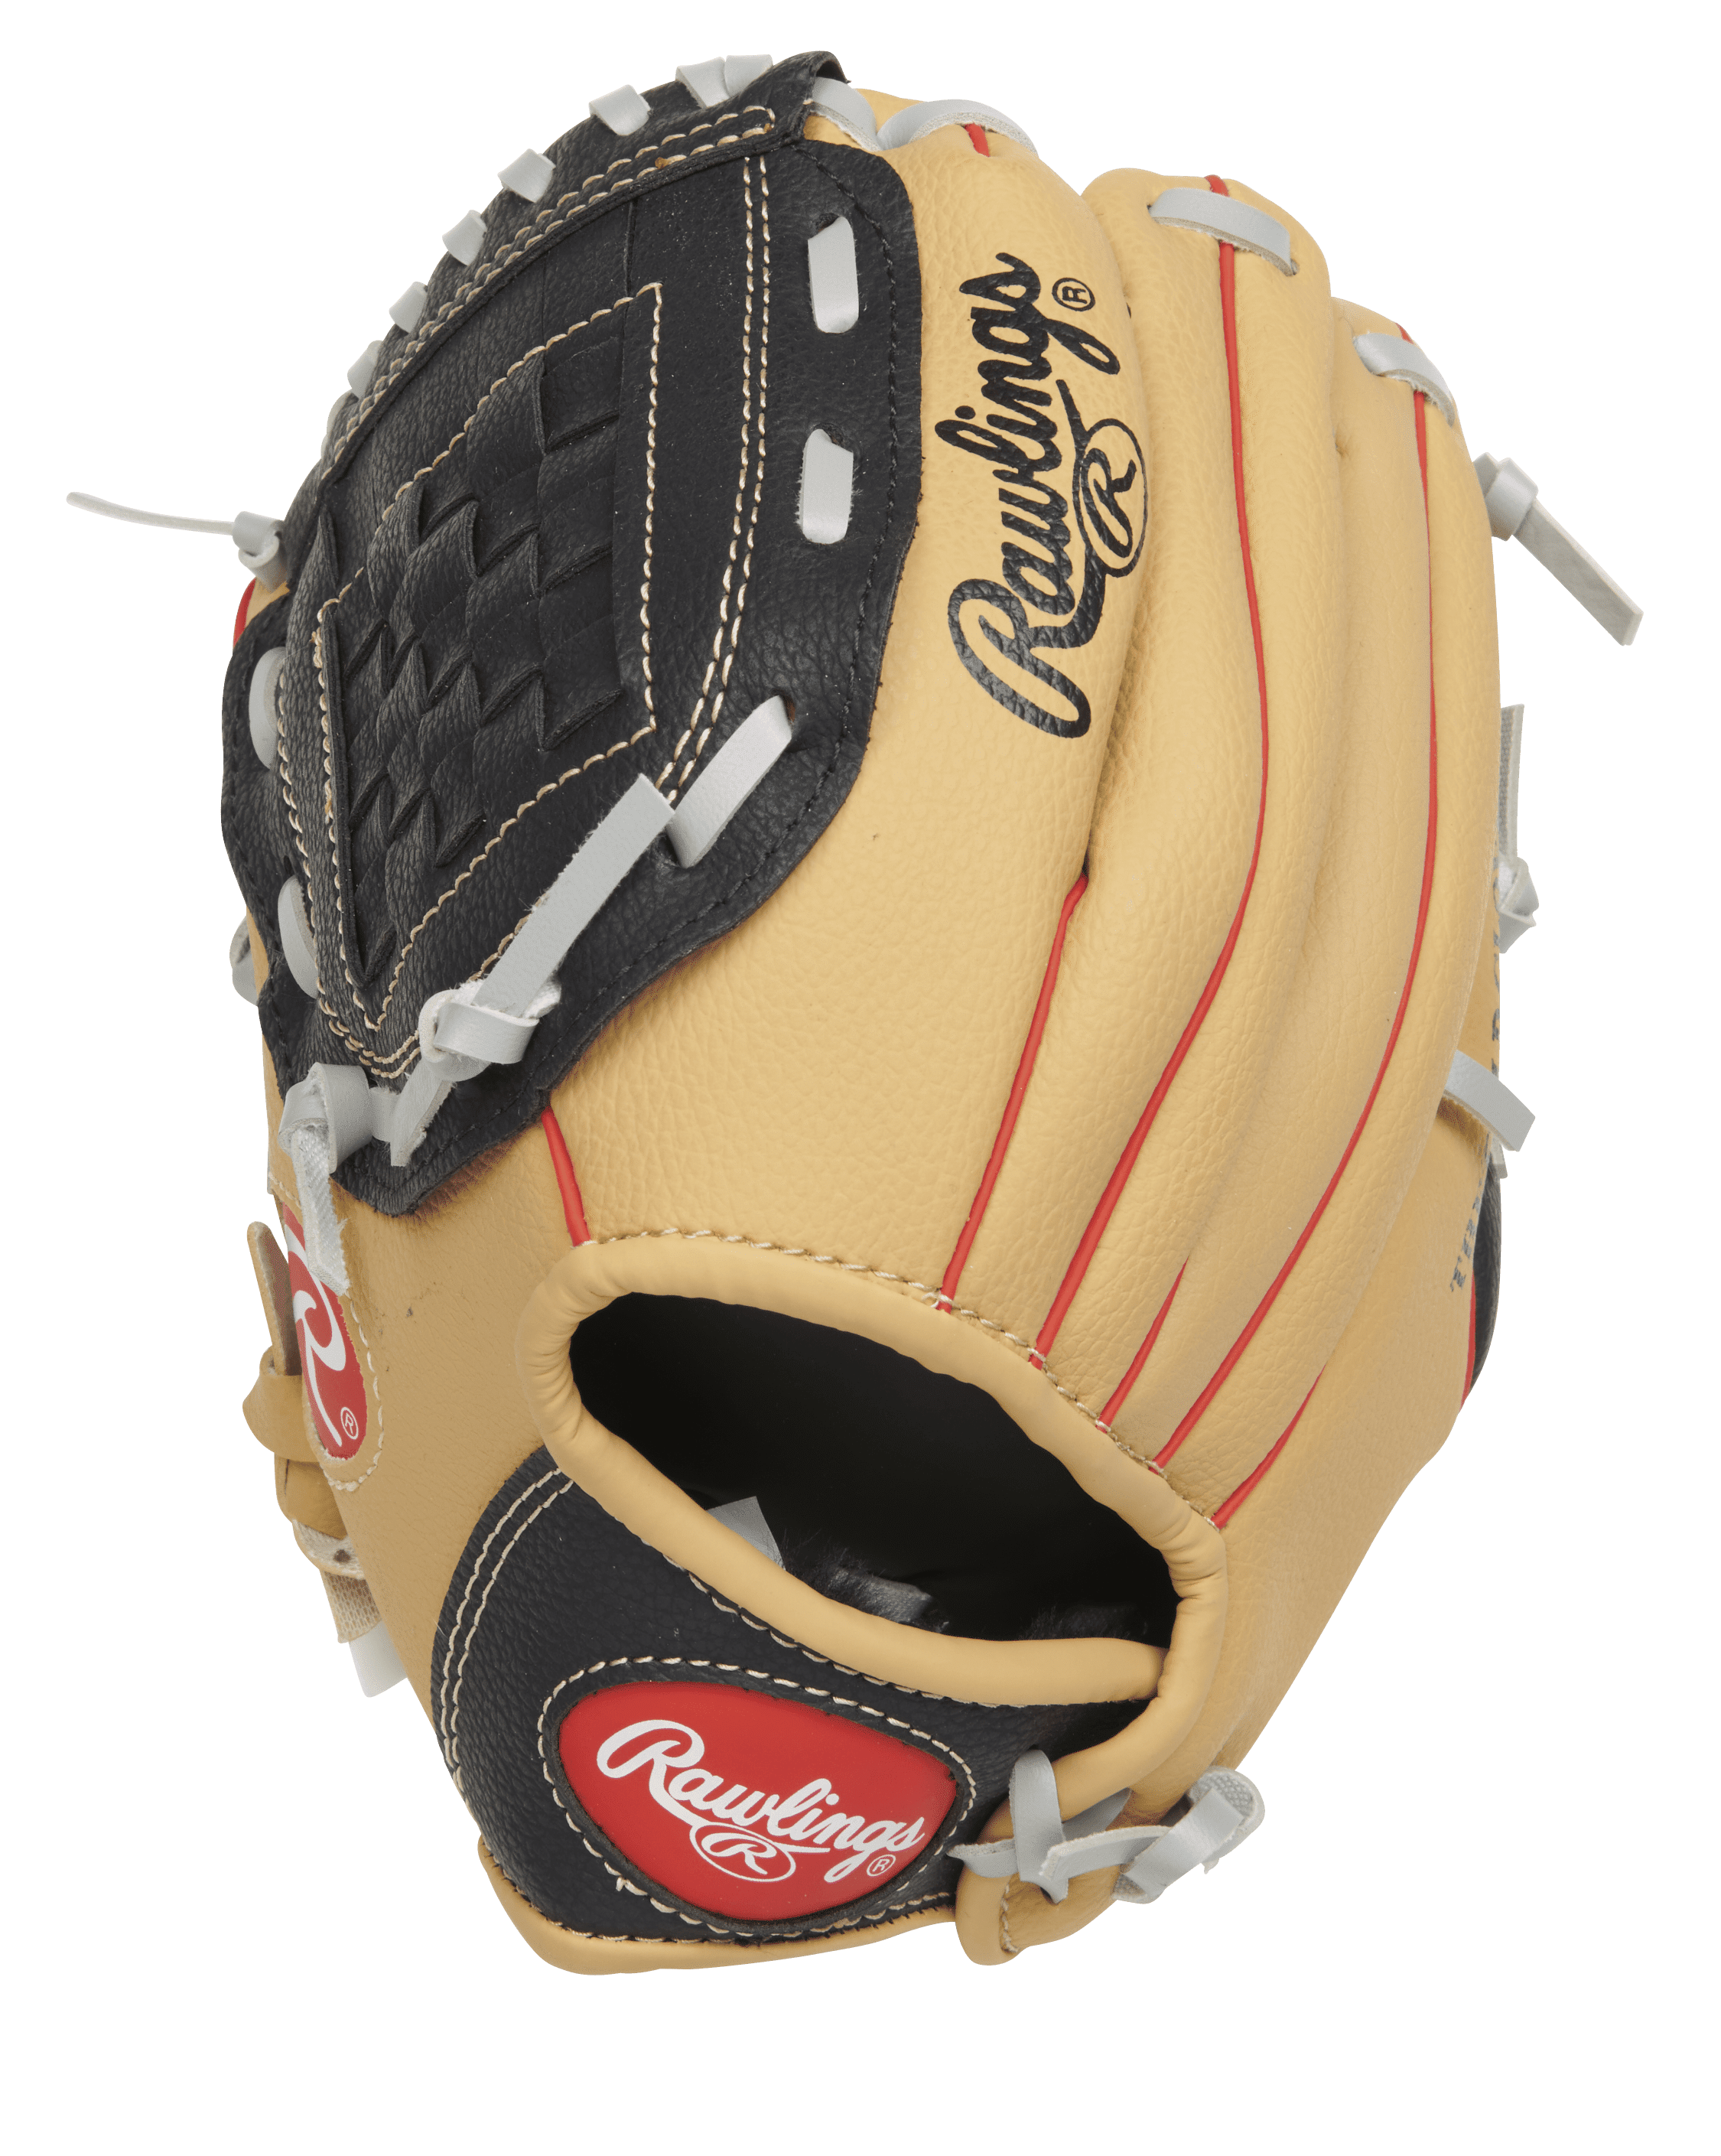 Dark 10" Rawlings Players Series Youth Tball/Baseball Glove Ages 5-7 